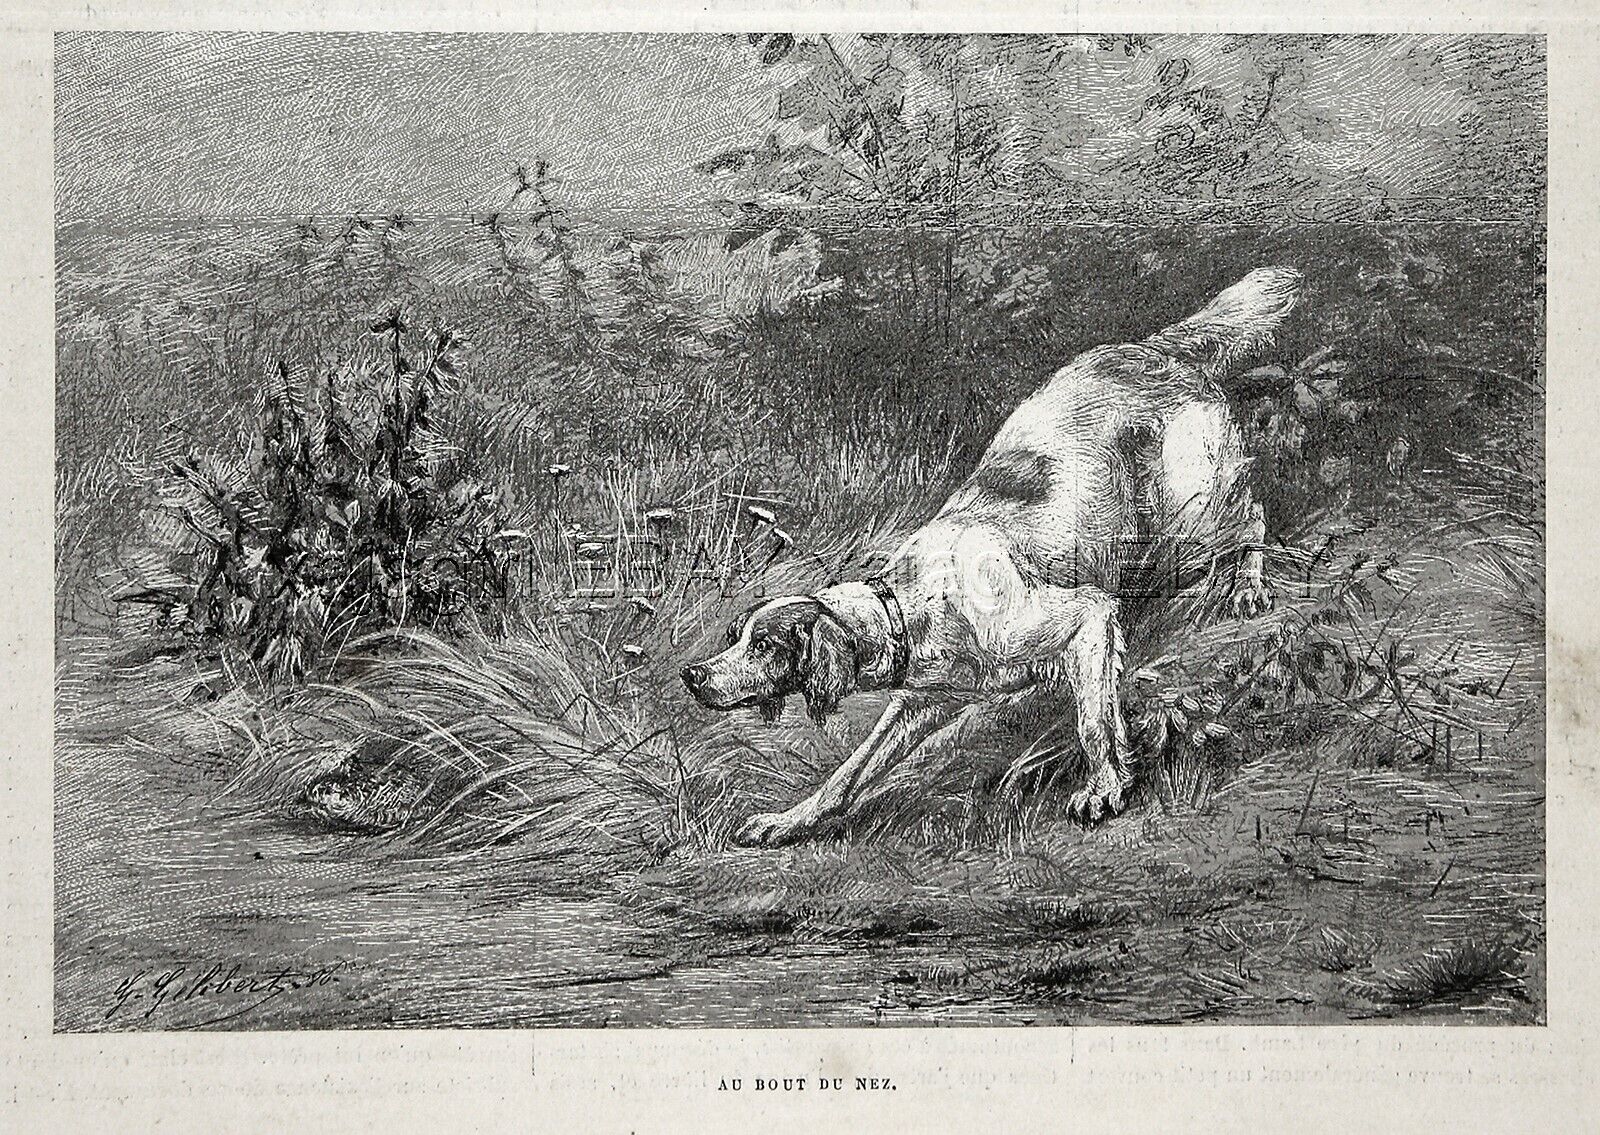 Dog English Setter or Red and White Setter Pointing Quail, 1880s Antique Print